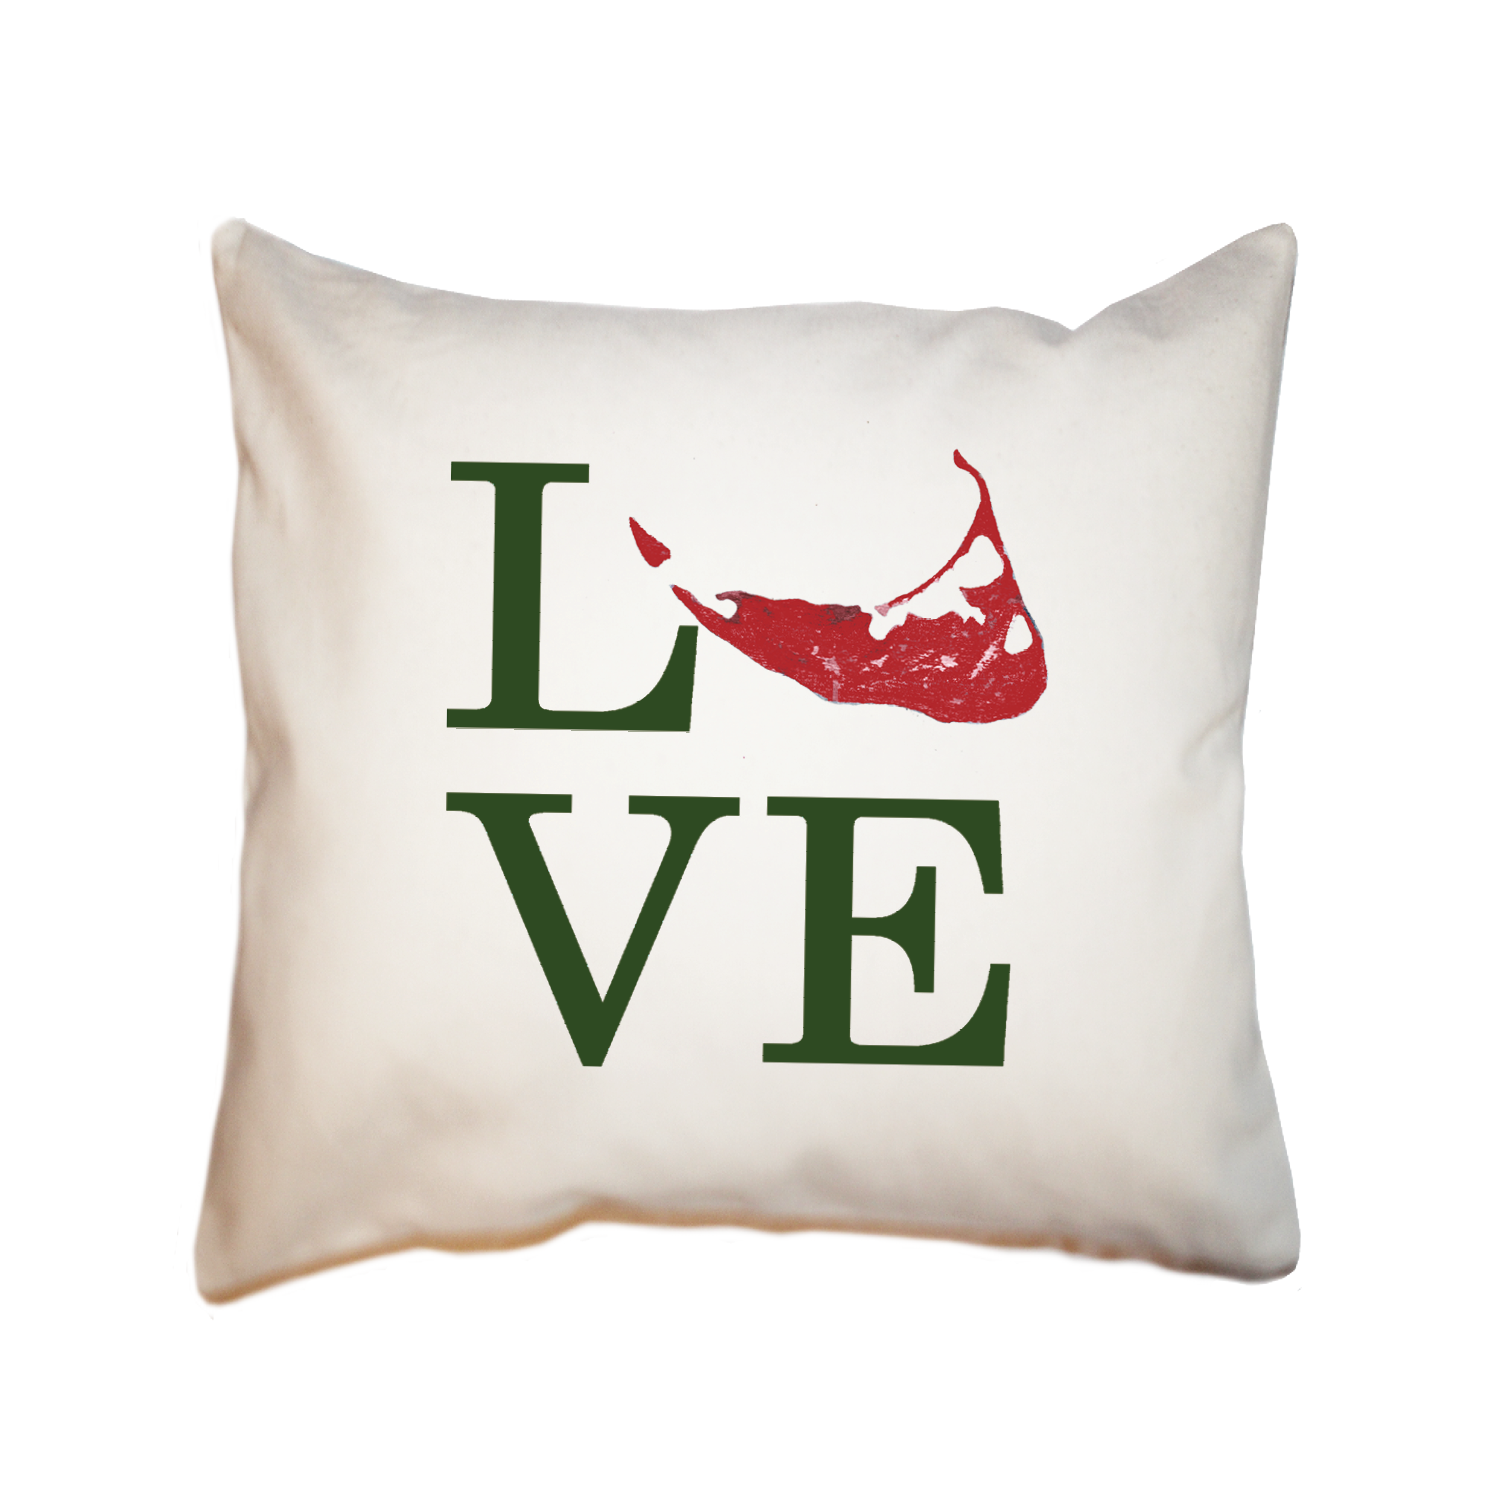 love nantucket island in red and green square pillow